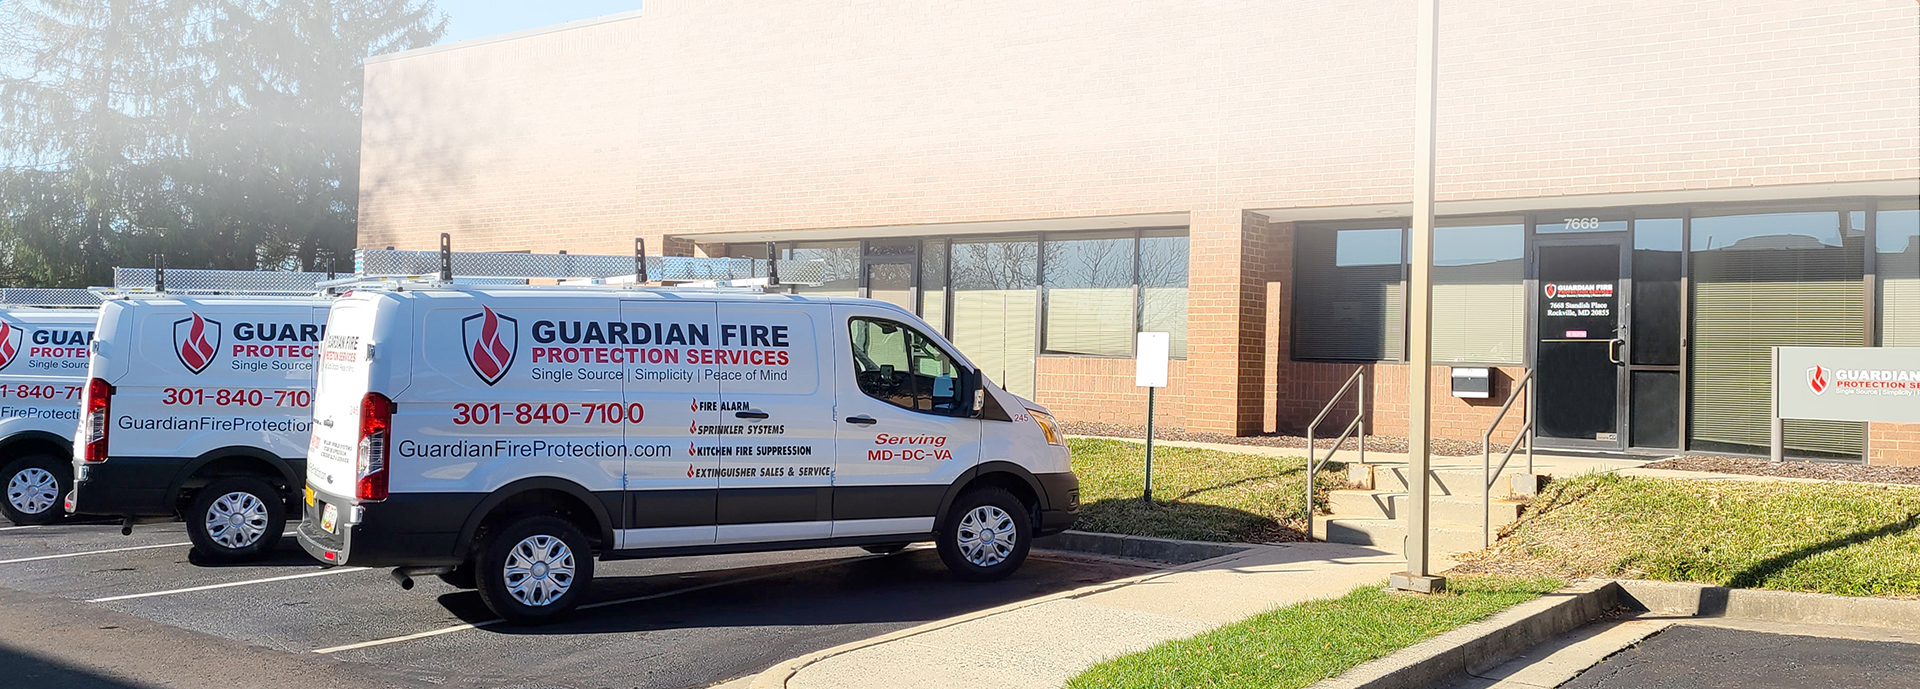 Knox Lane Partners with Guardian Fire Protection Services